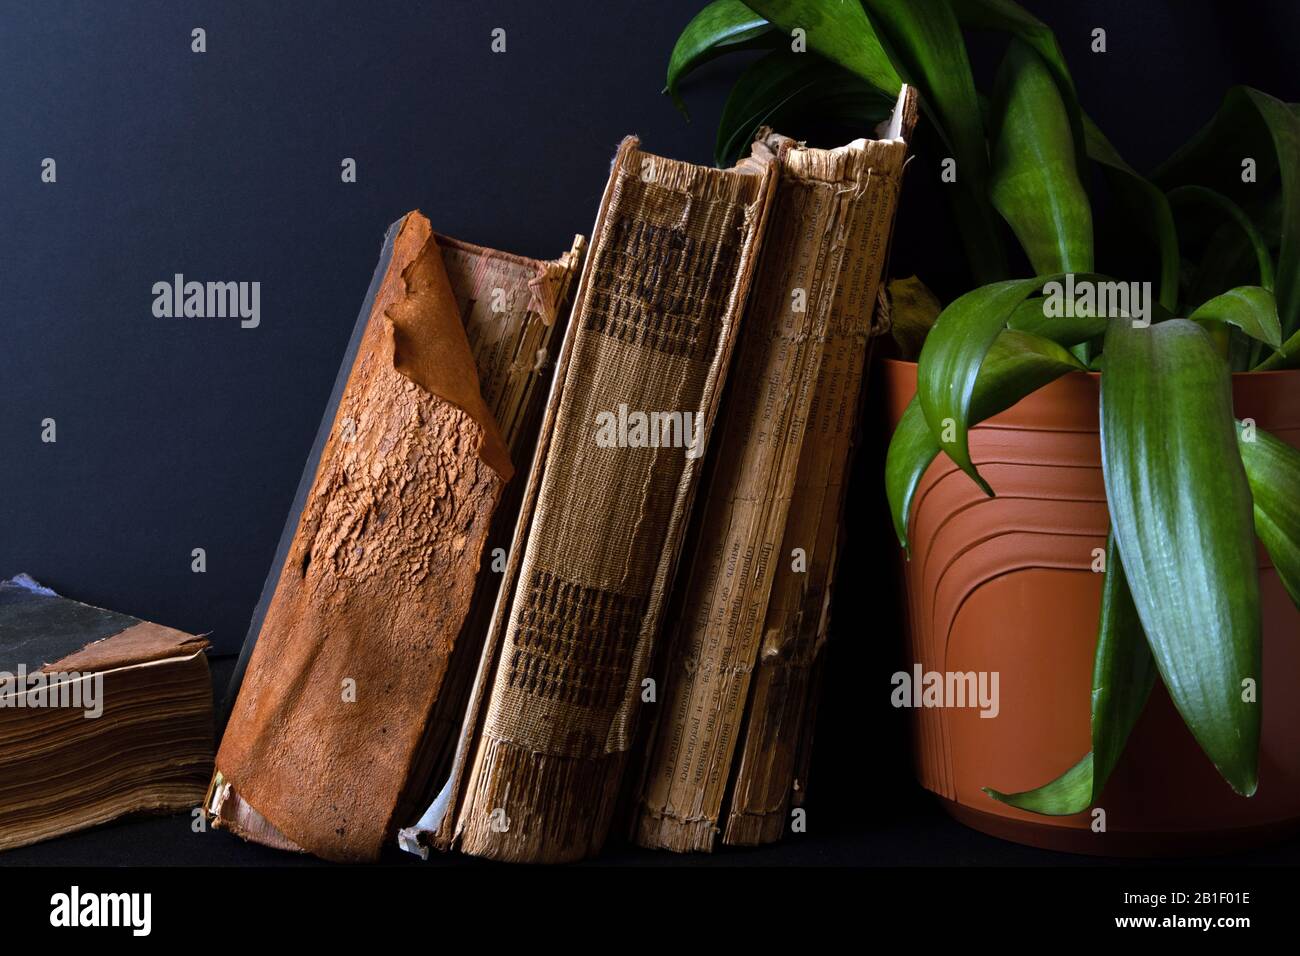 Stack of ancient books with damaged bindings and big pot with green plant Stock Photo